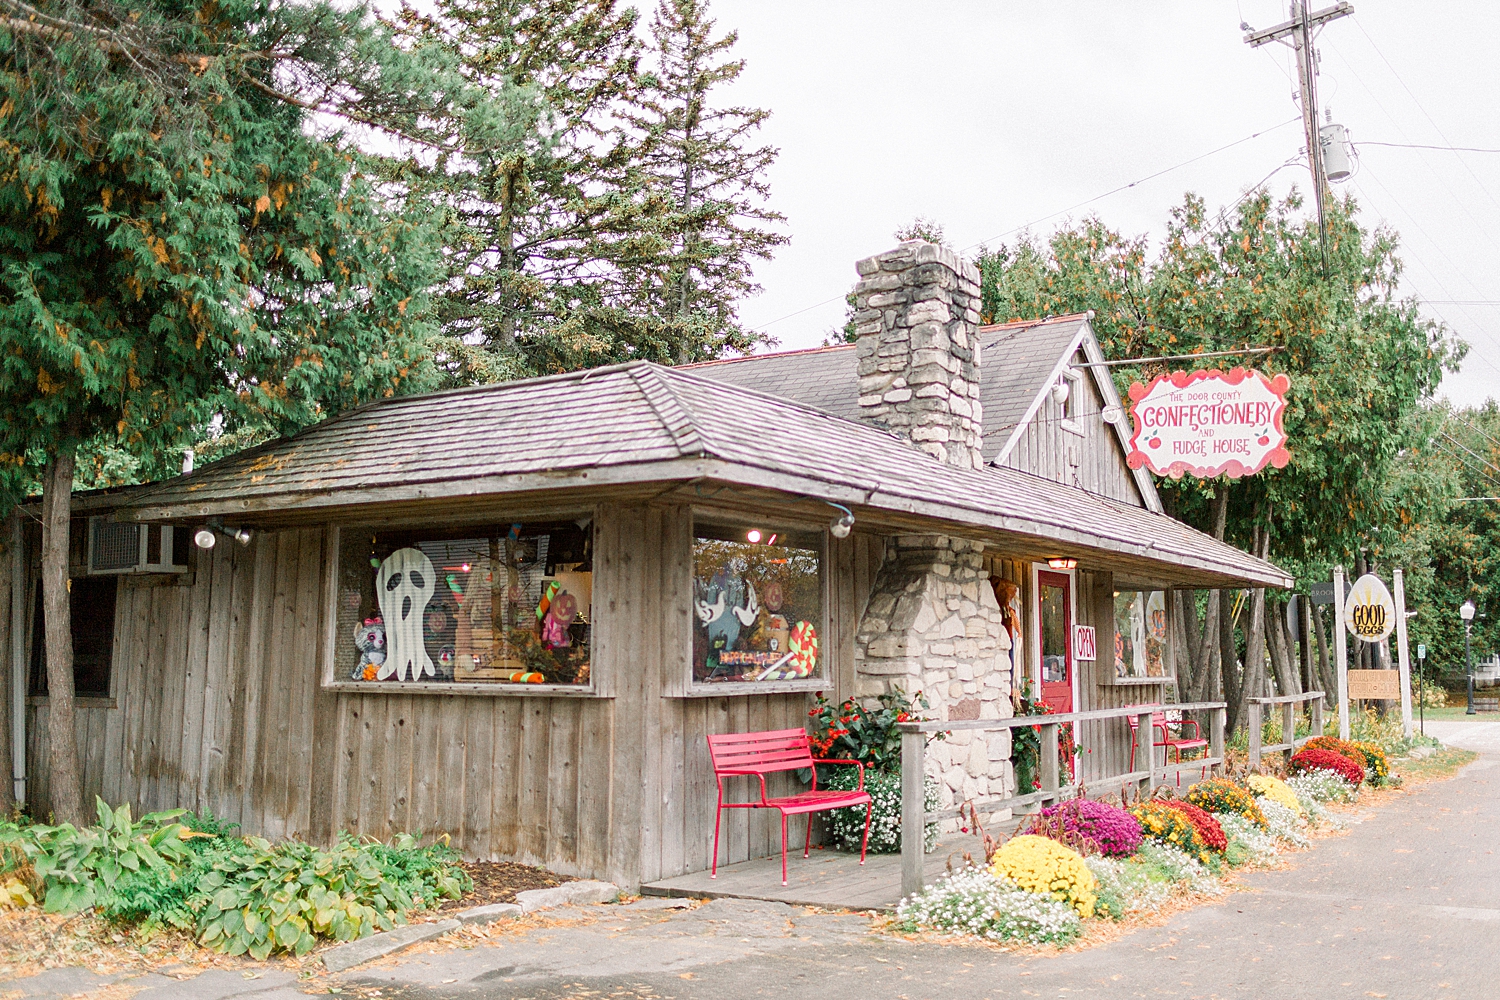 The Door County Confectionery and Fudge House in the fall. Our favorite shops are listed in our Door County Travel Guide.